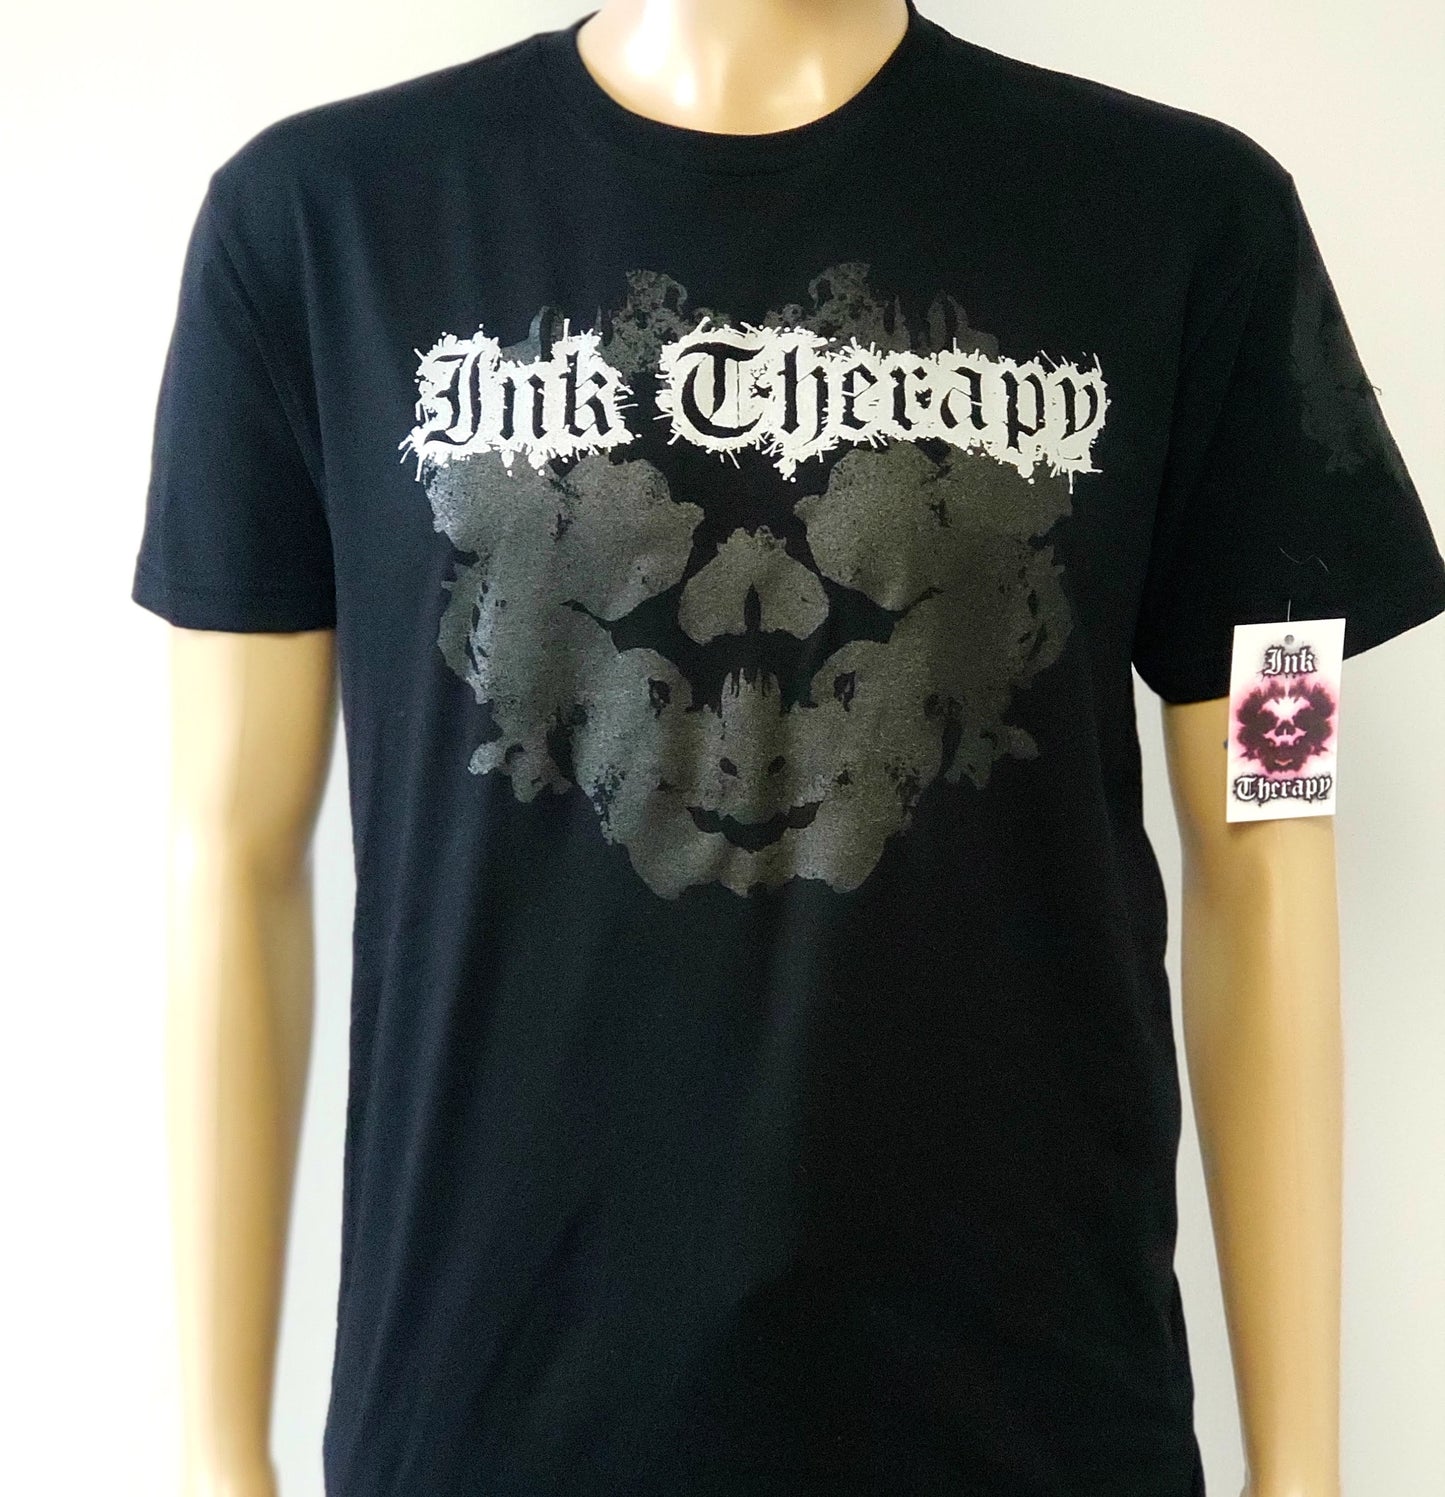 Original Ink Therapy T-shirt